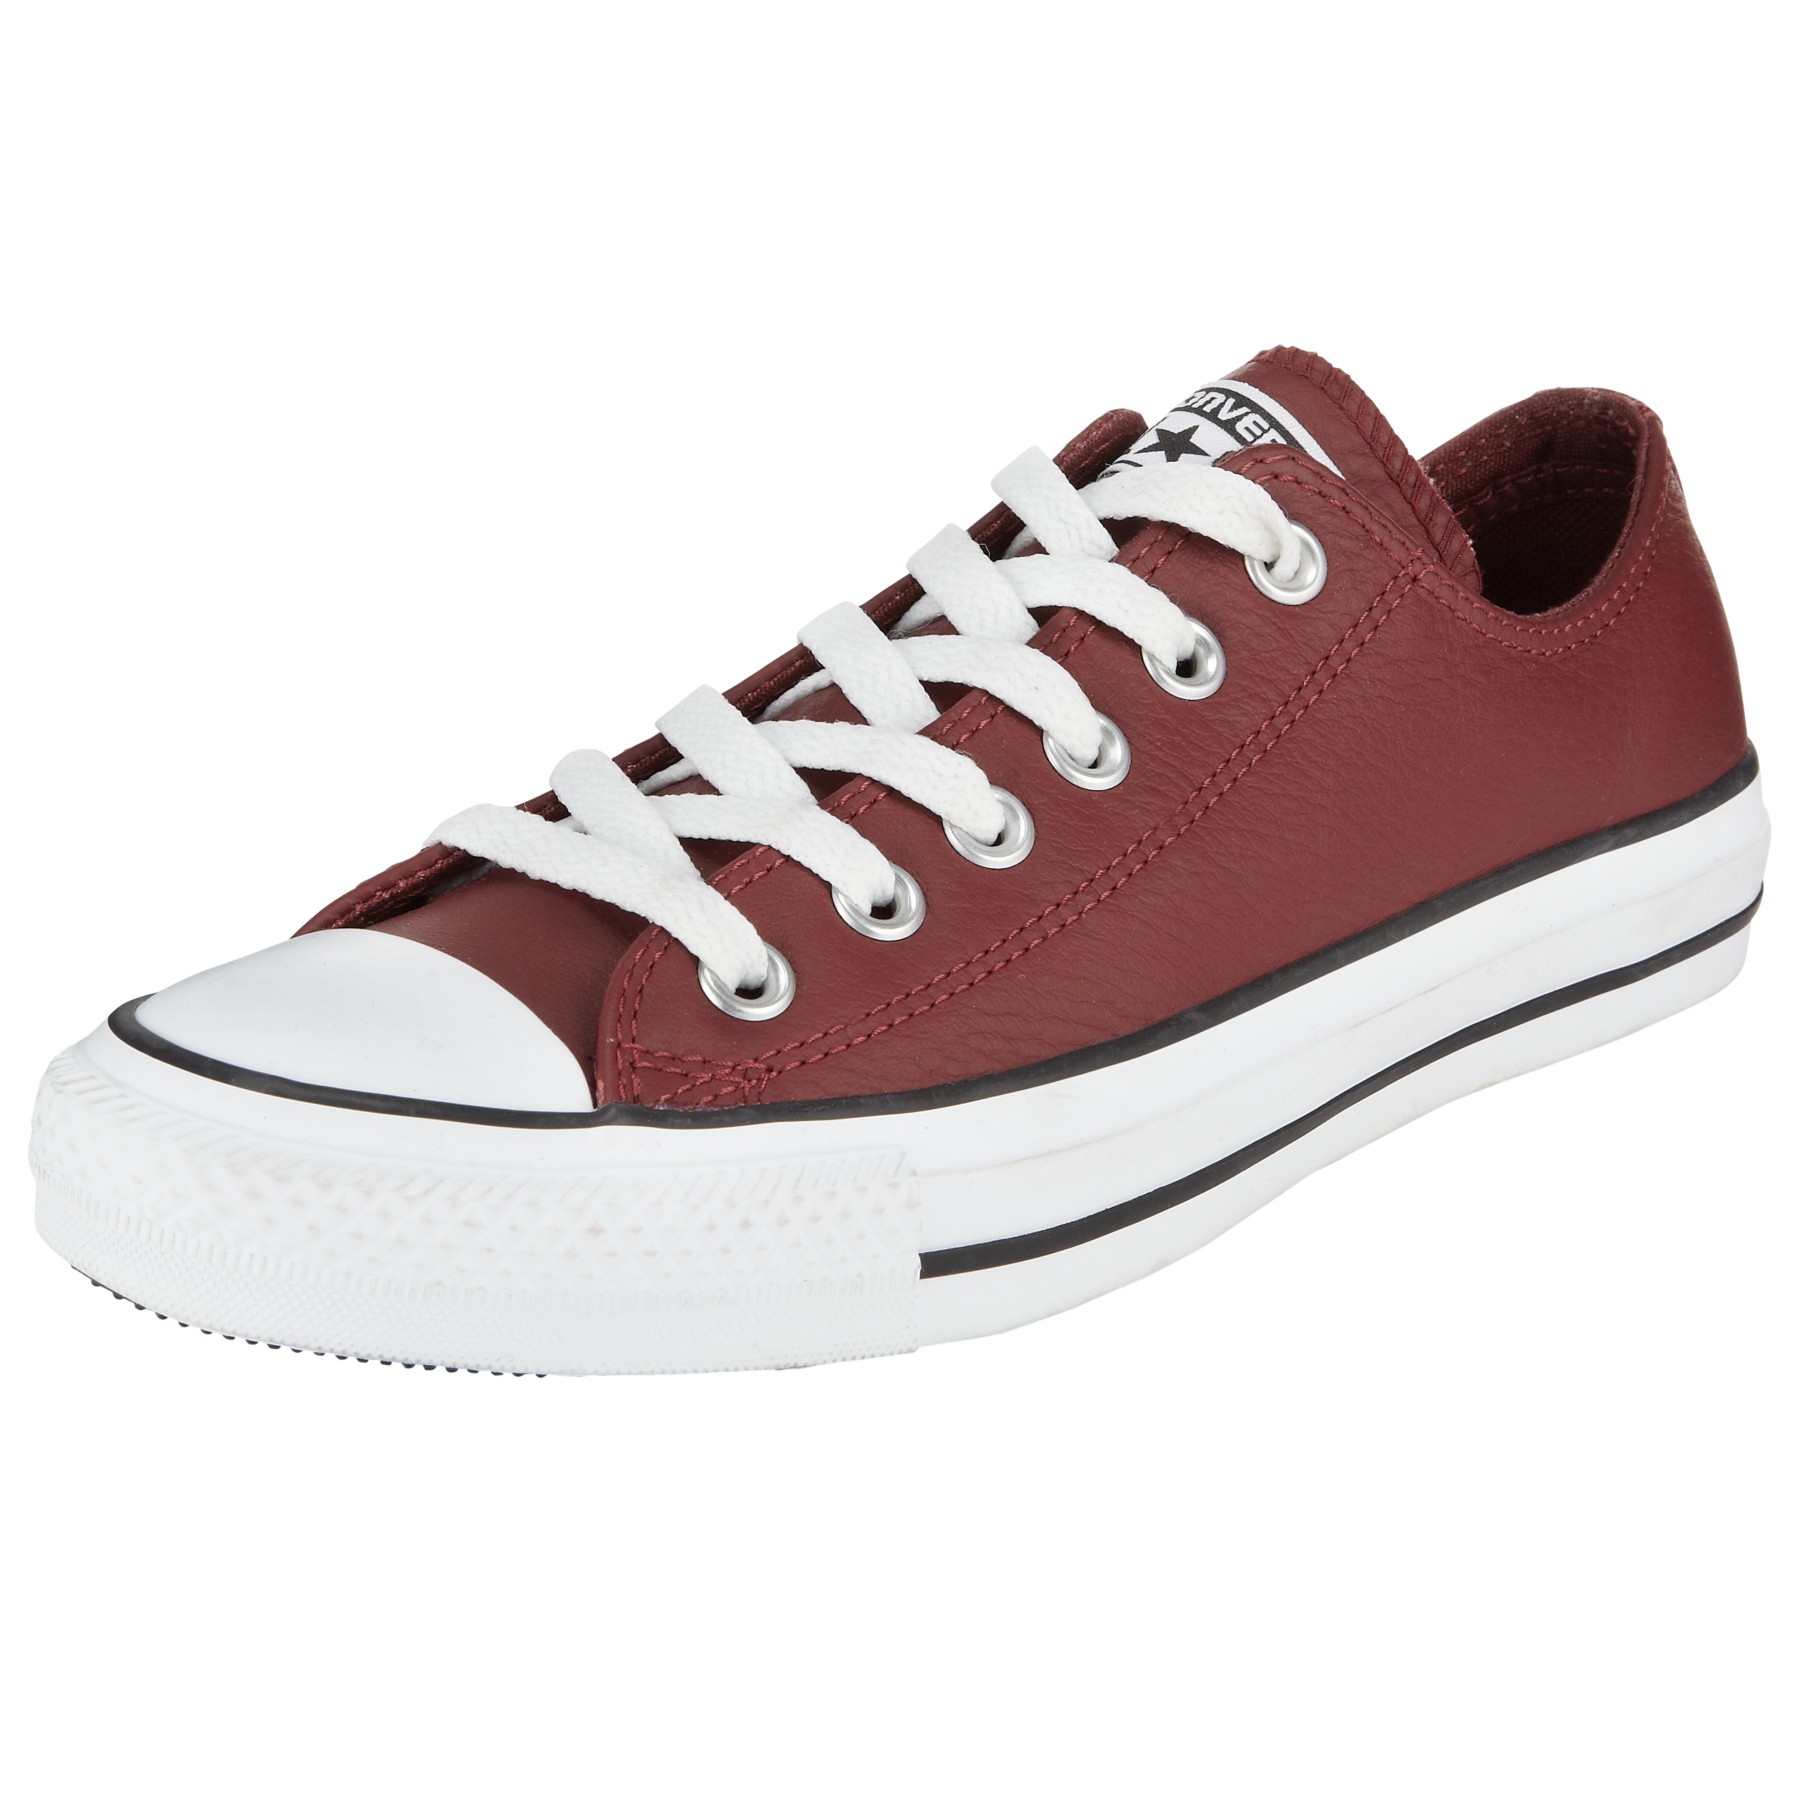 Converse Chuck Taylor All Star Ox Leather Trainers in Red (Bordeaux) | Lyst